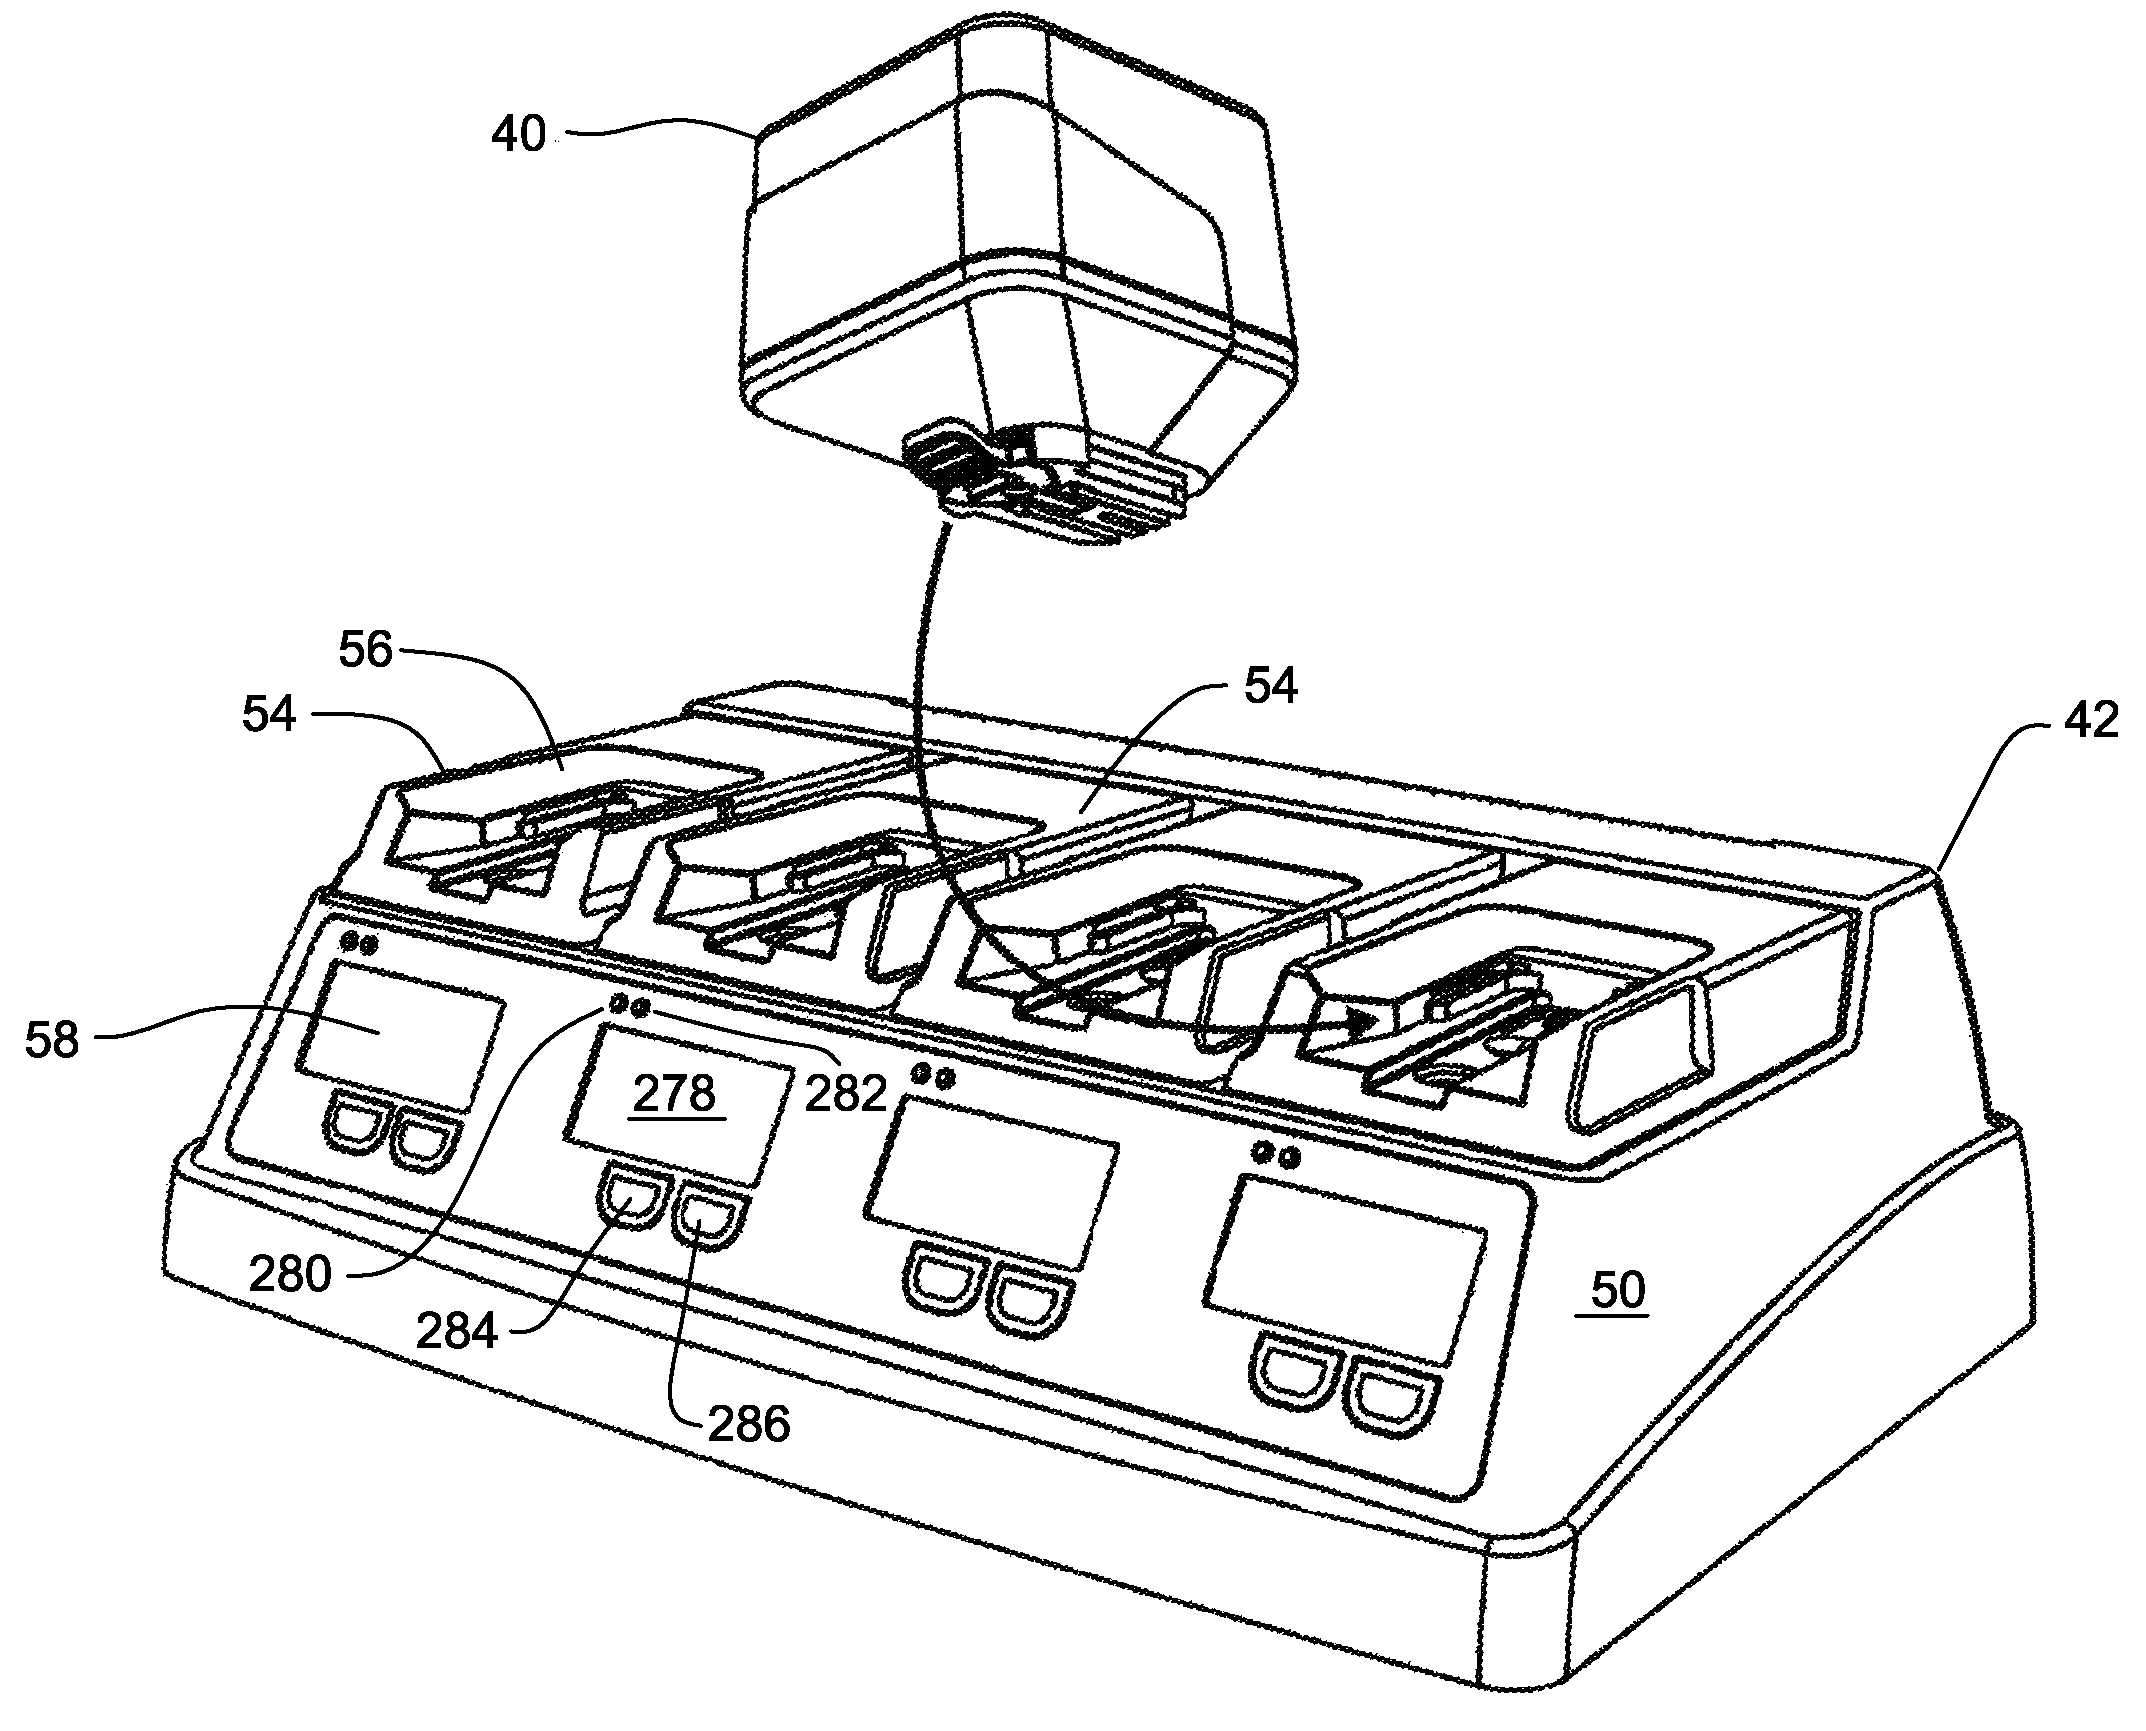 System and method for managing the operation of a battery powered surgical tool and the battery used to power the tool